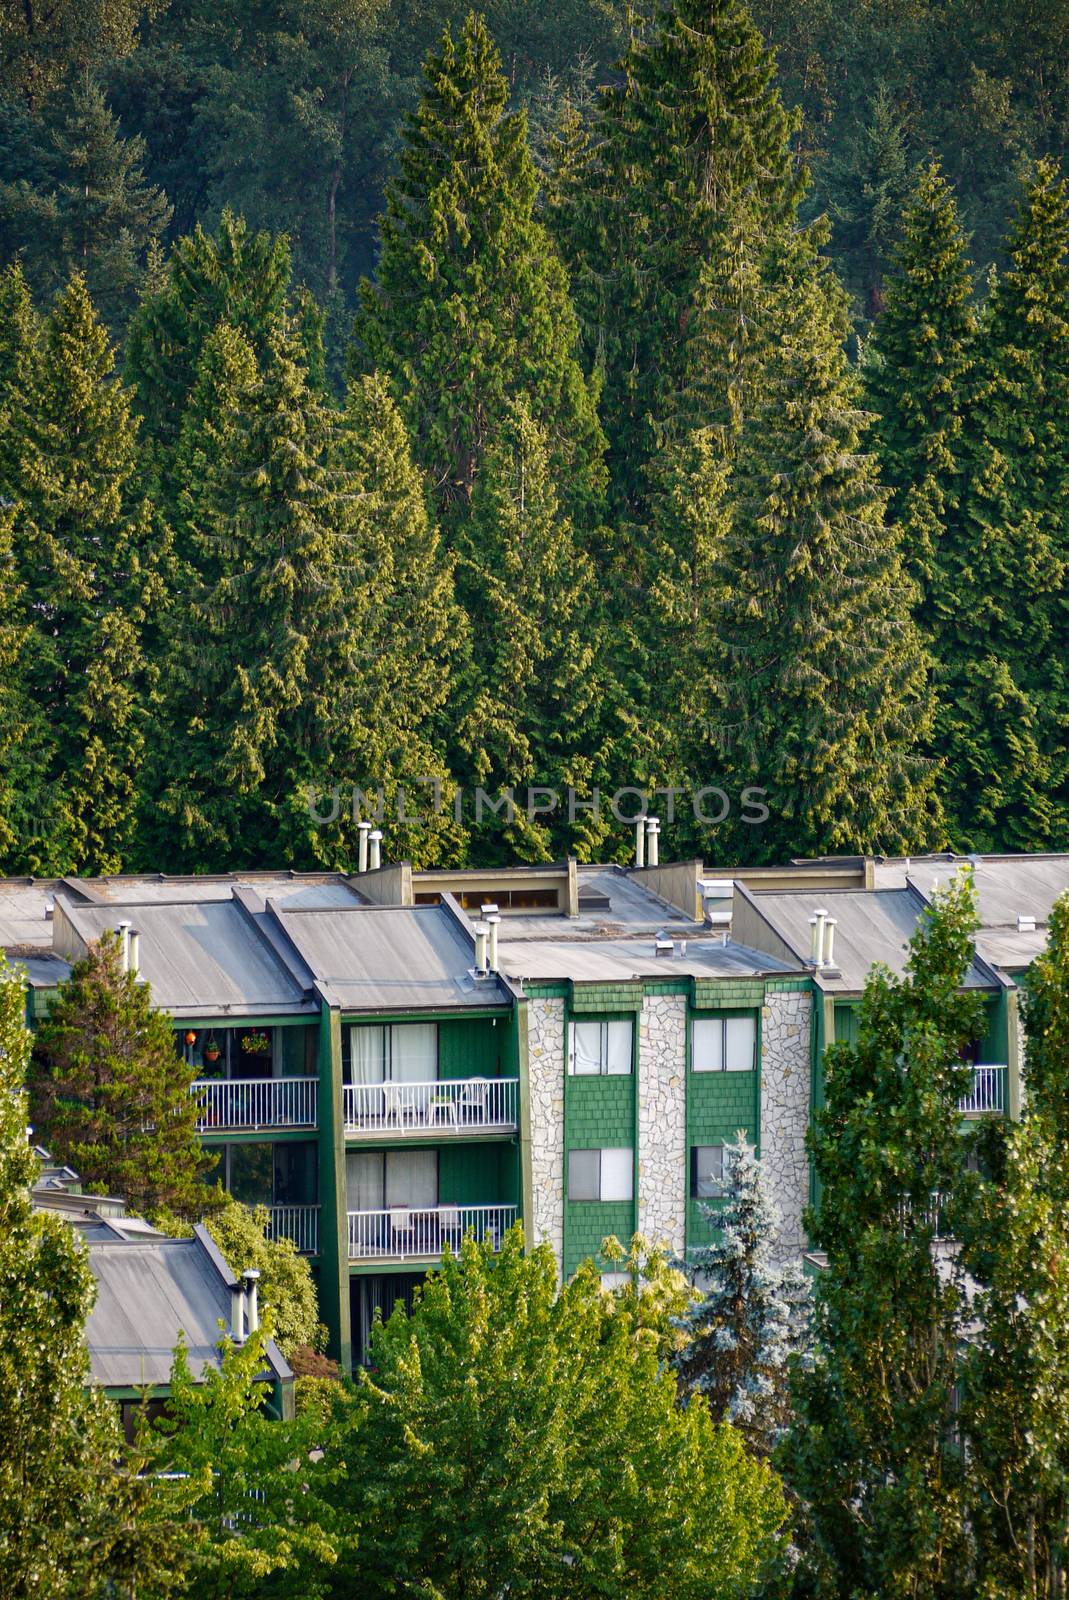 Top of low-rise residential building on green trees background.